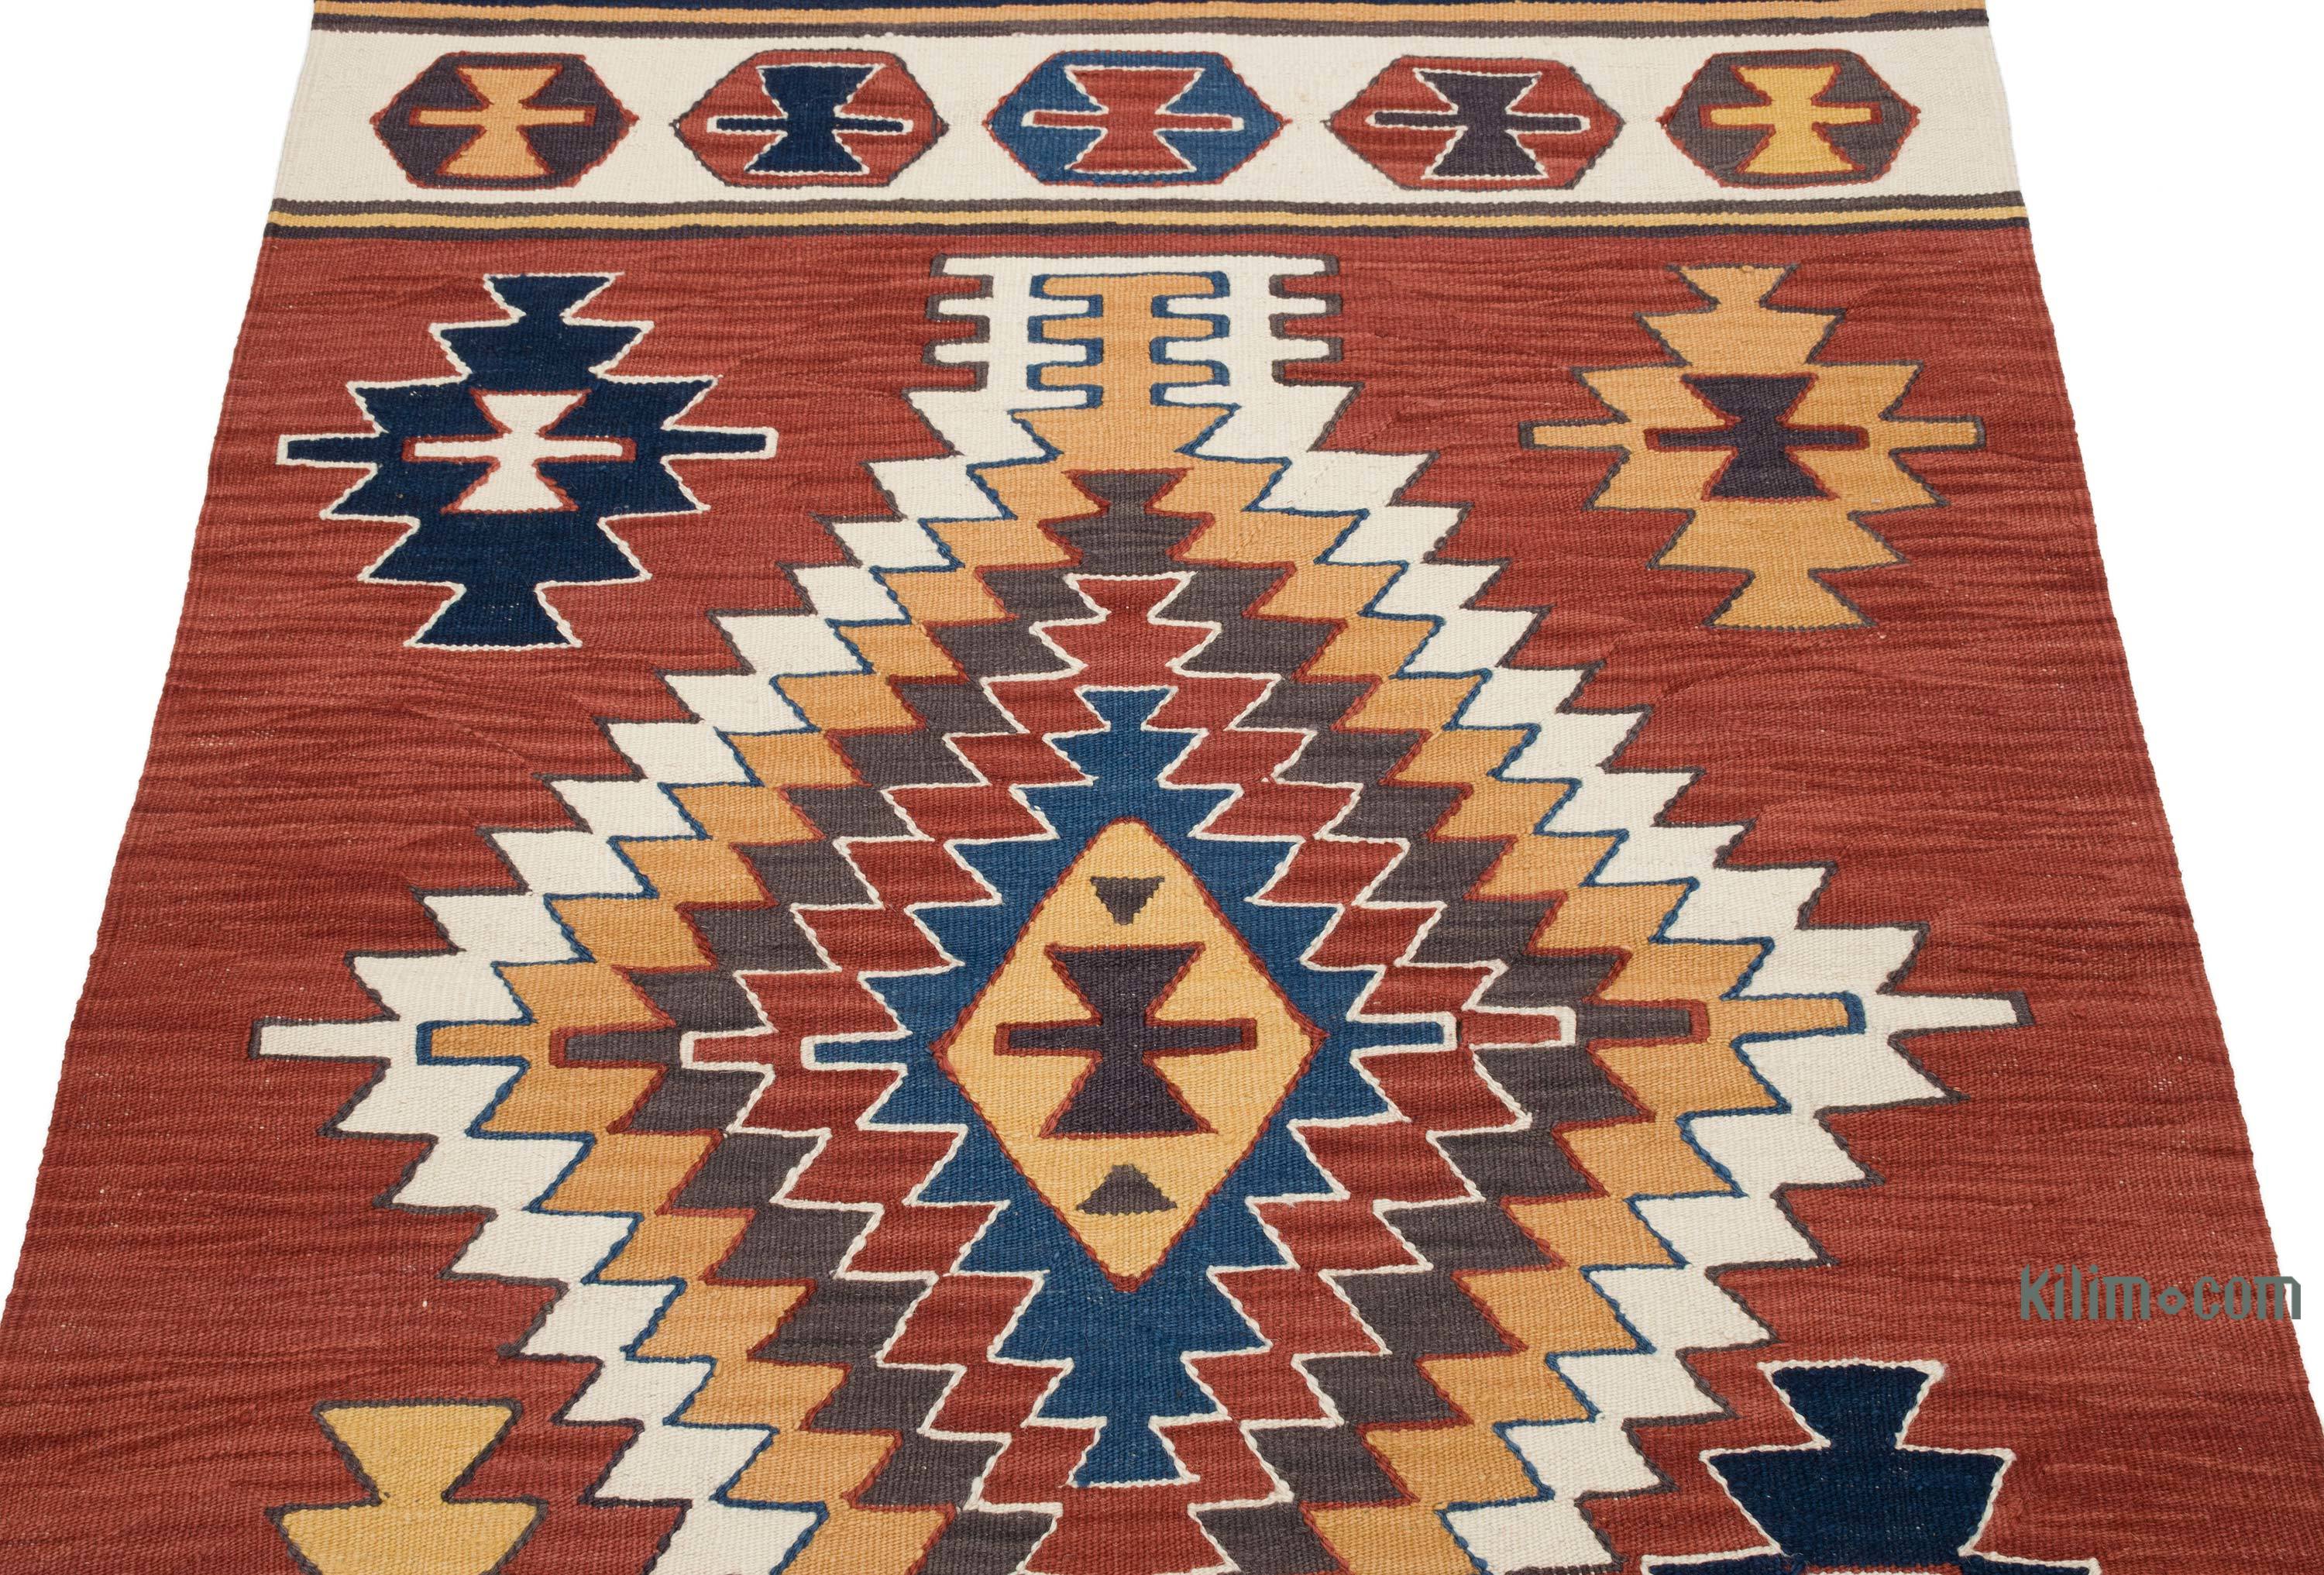 K0059513 New Handwoven Turkish Kilim Rug - 3' x 4' (36 x 48)  The Source  for Vintage Rugs, Tribal Kilim Rugs, Wool Turkish Rugs, Overdyed Persian  Rugs, Runner Rugs, Patchwork Rugs